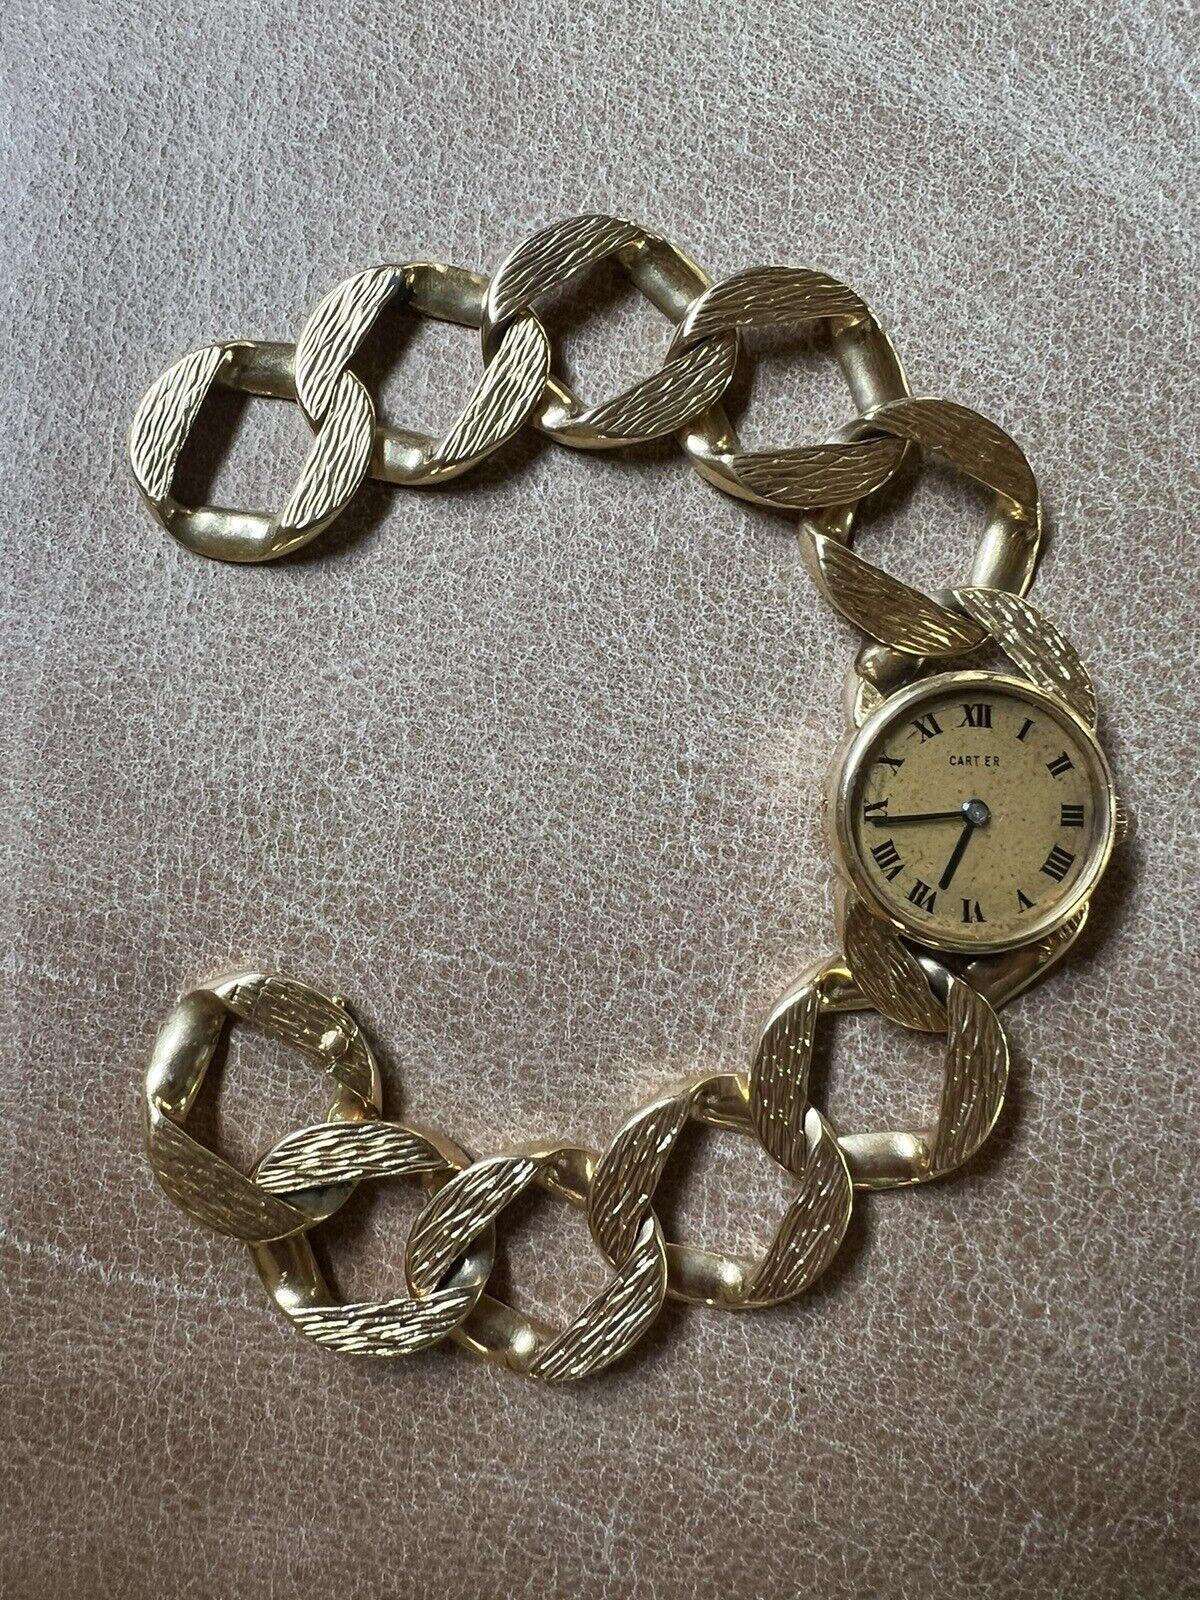 Cartier London Jaeger LeCoultre 18k Yellow Gold Curb Link Bracelet Watch Circa 1960s Vintage

Here is your chance to purchase a beautiful and highly collectible designer bracelet watch.  

The length is 7.25 inches.  The weight is 65 grams.  The